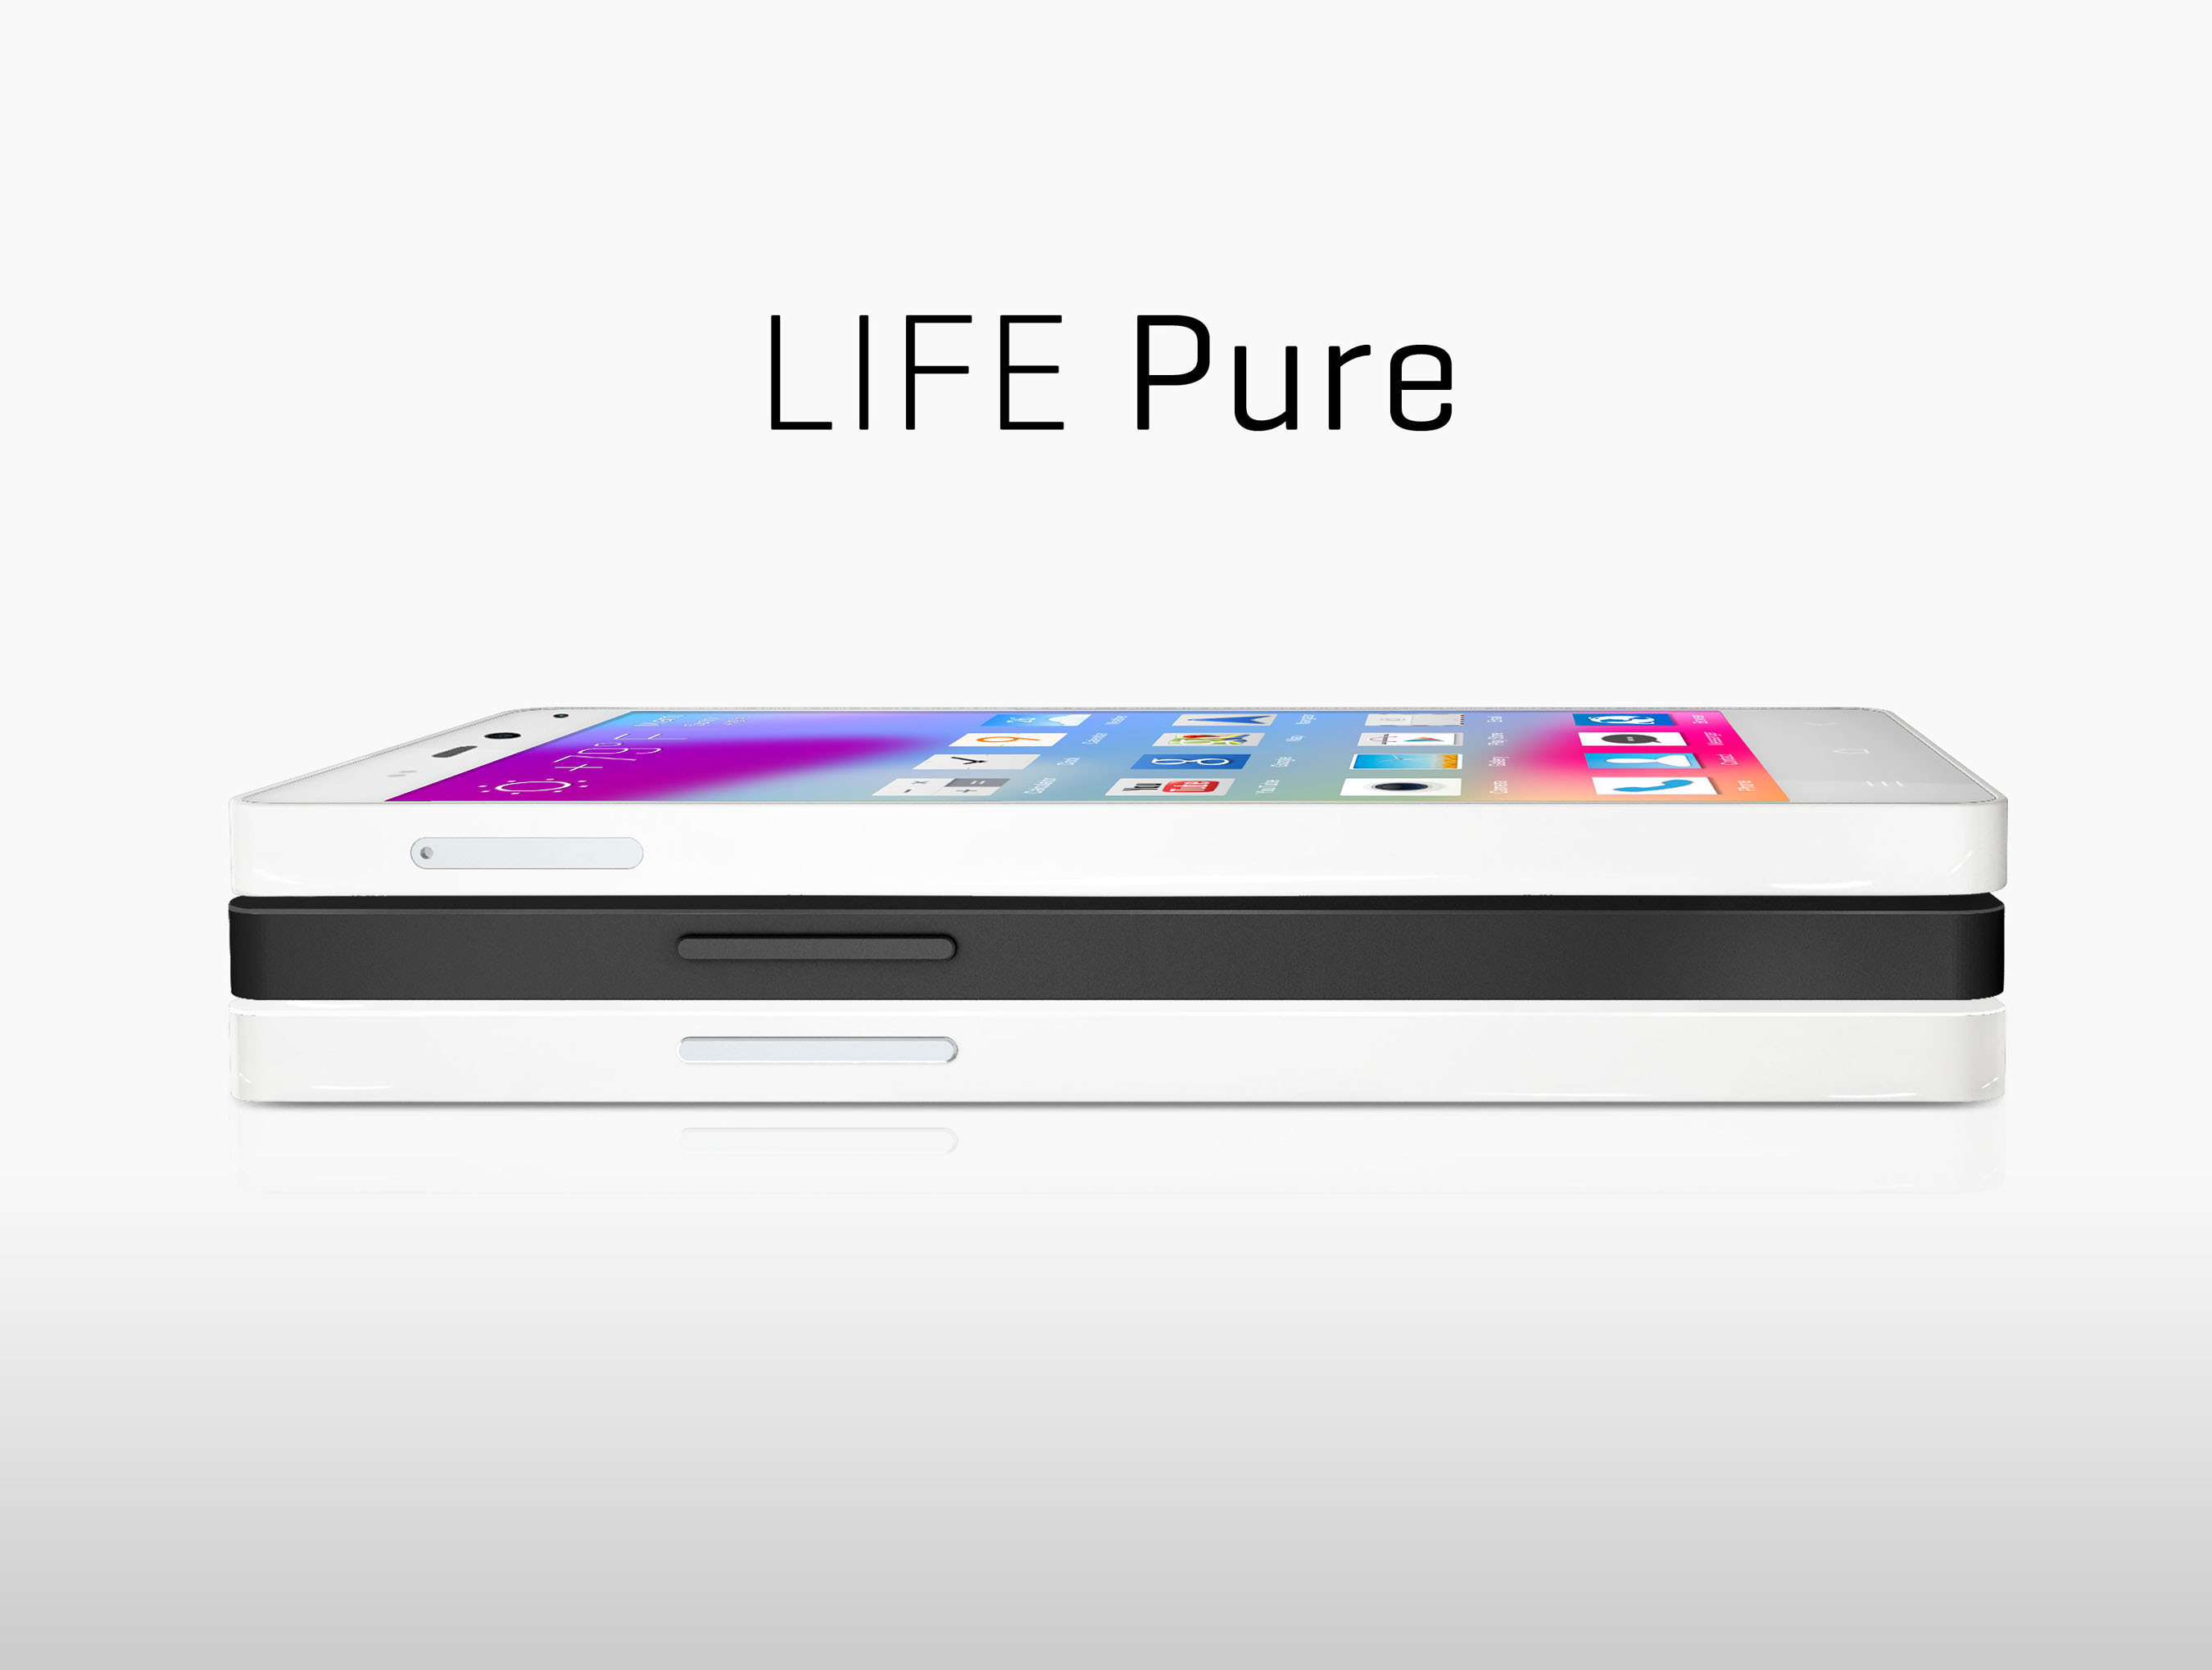 BLU Products introduces LIFE PURE smartphone device, featuring Stunning Design with Flagship Performance. (PRNewsFoto/BLU Products) (PRNewsFoto/BLU PRODUCTS)